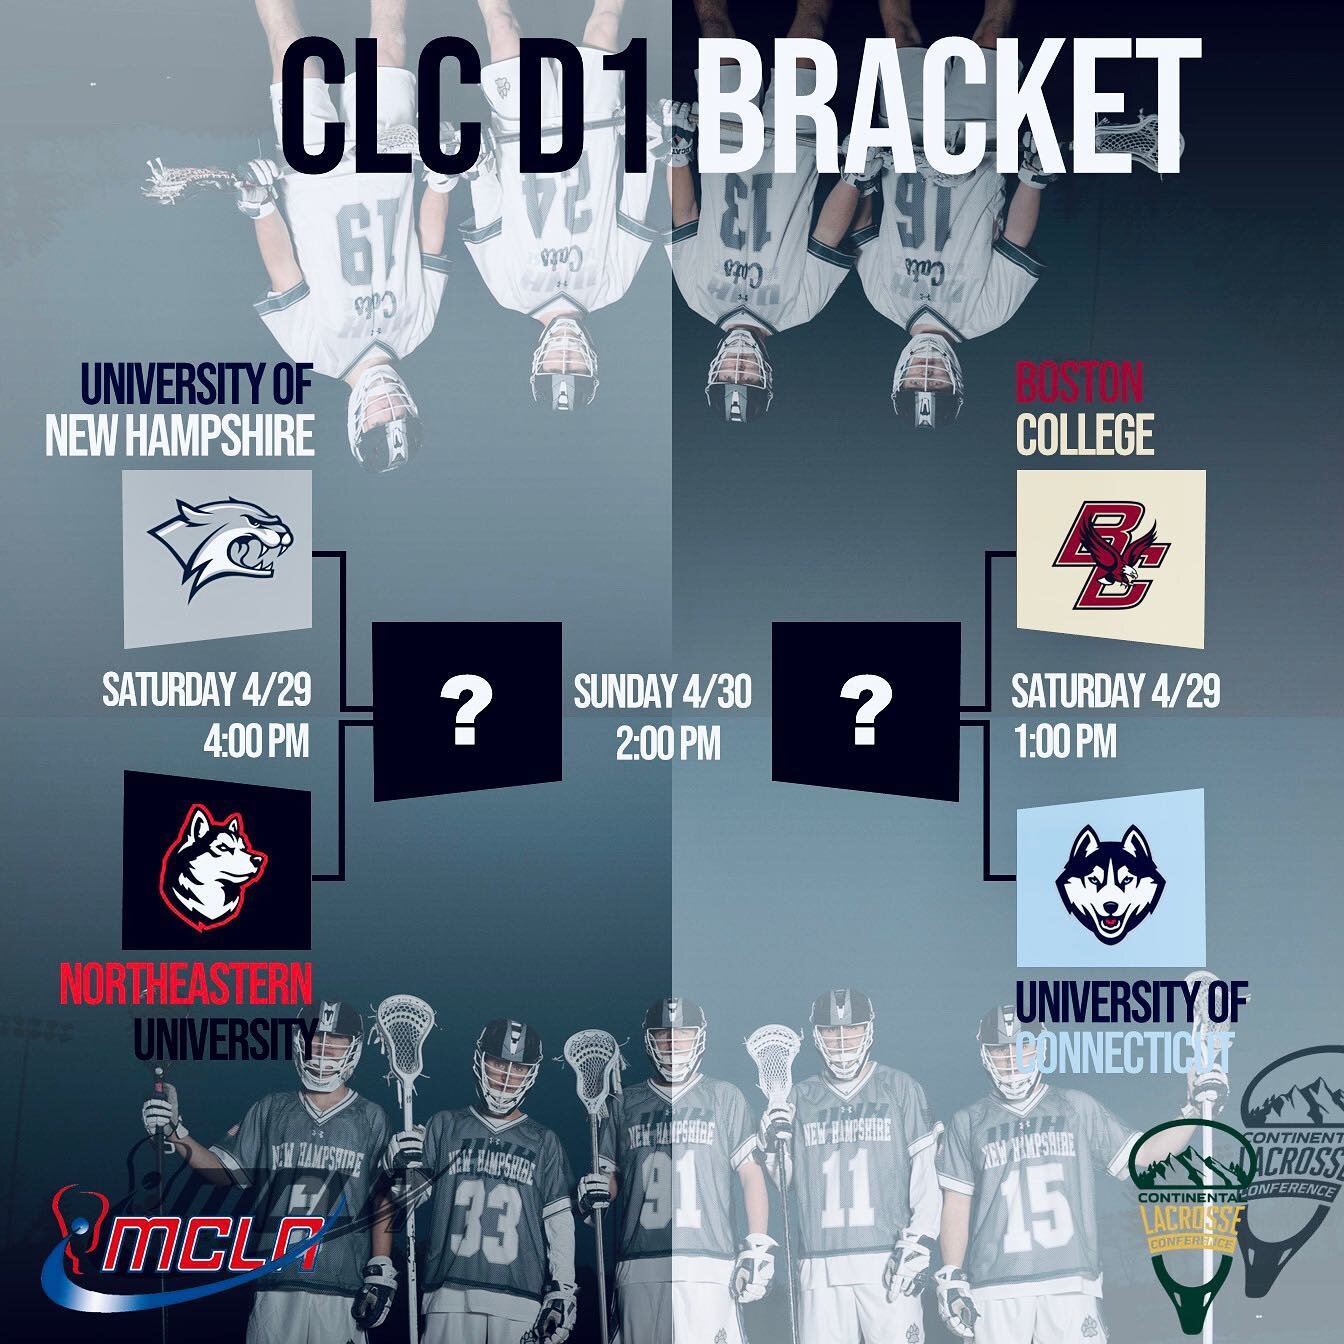 Tomorrow the cats take on the huskies for the first matchup of the CLC playoff tournament series. #clc #gocats